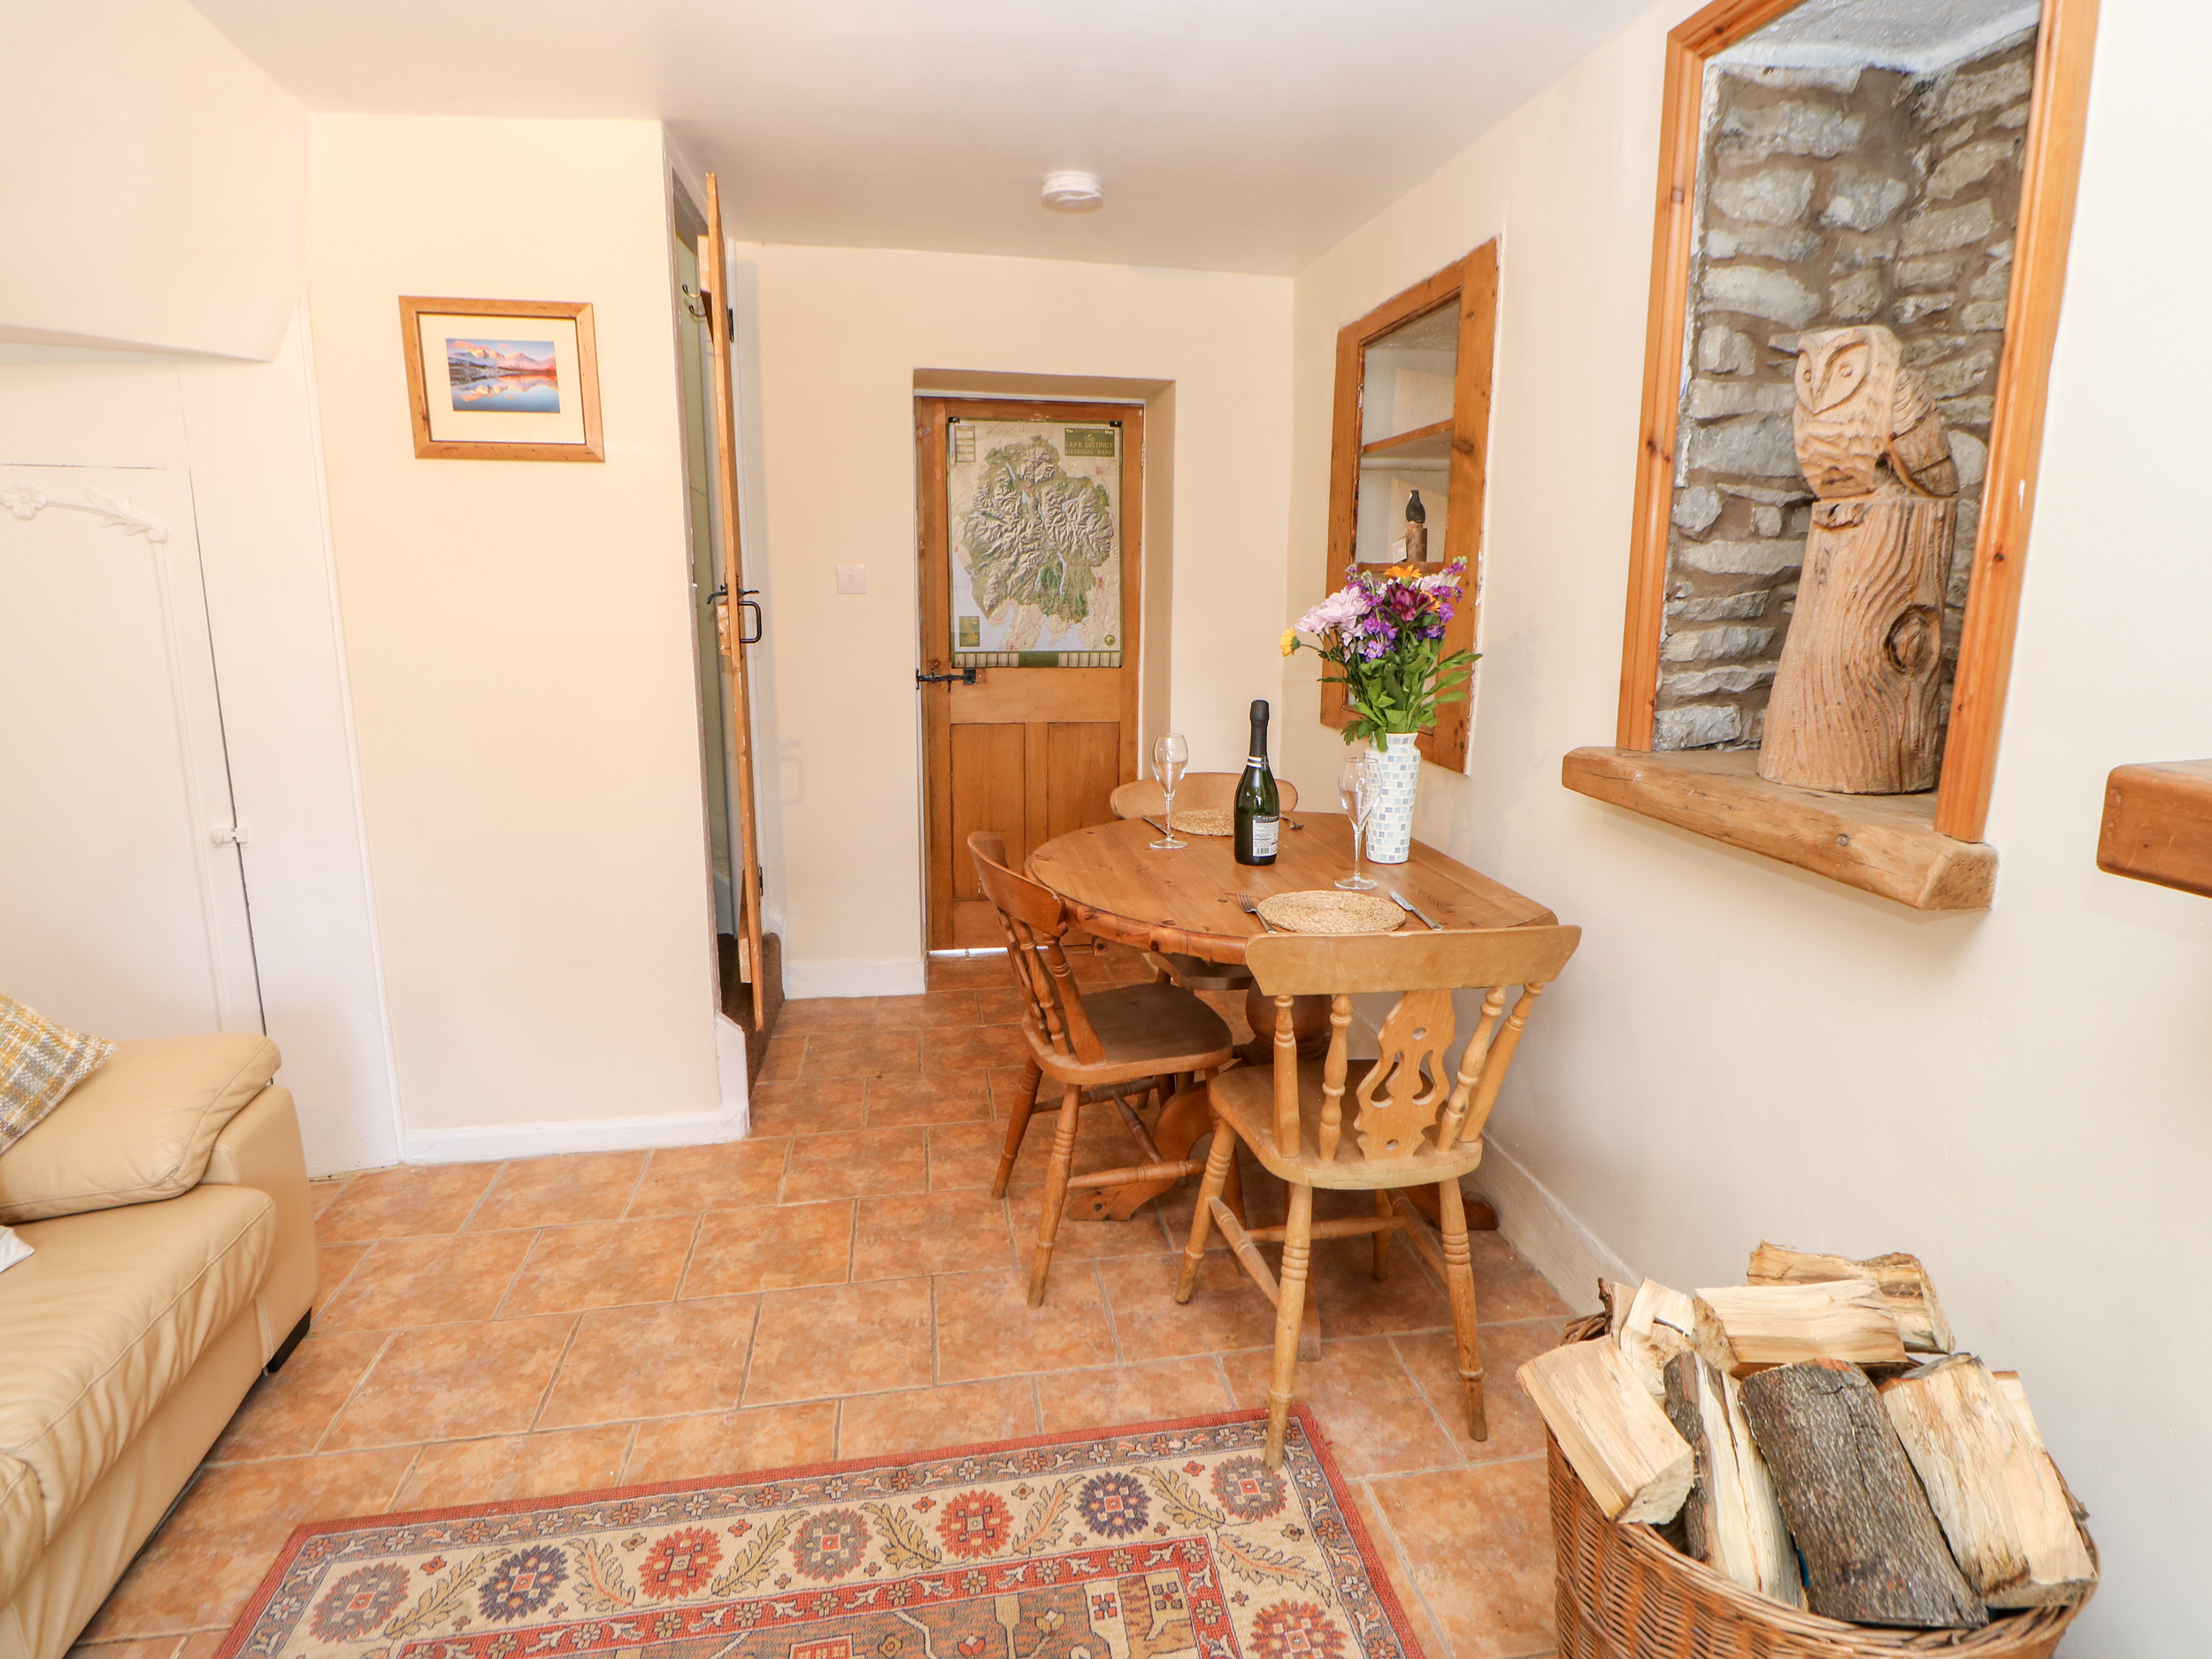 Kidsty Cottage, The Lake District and Cumbria